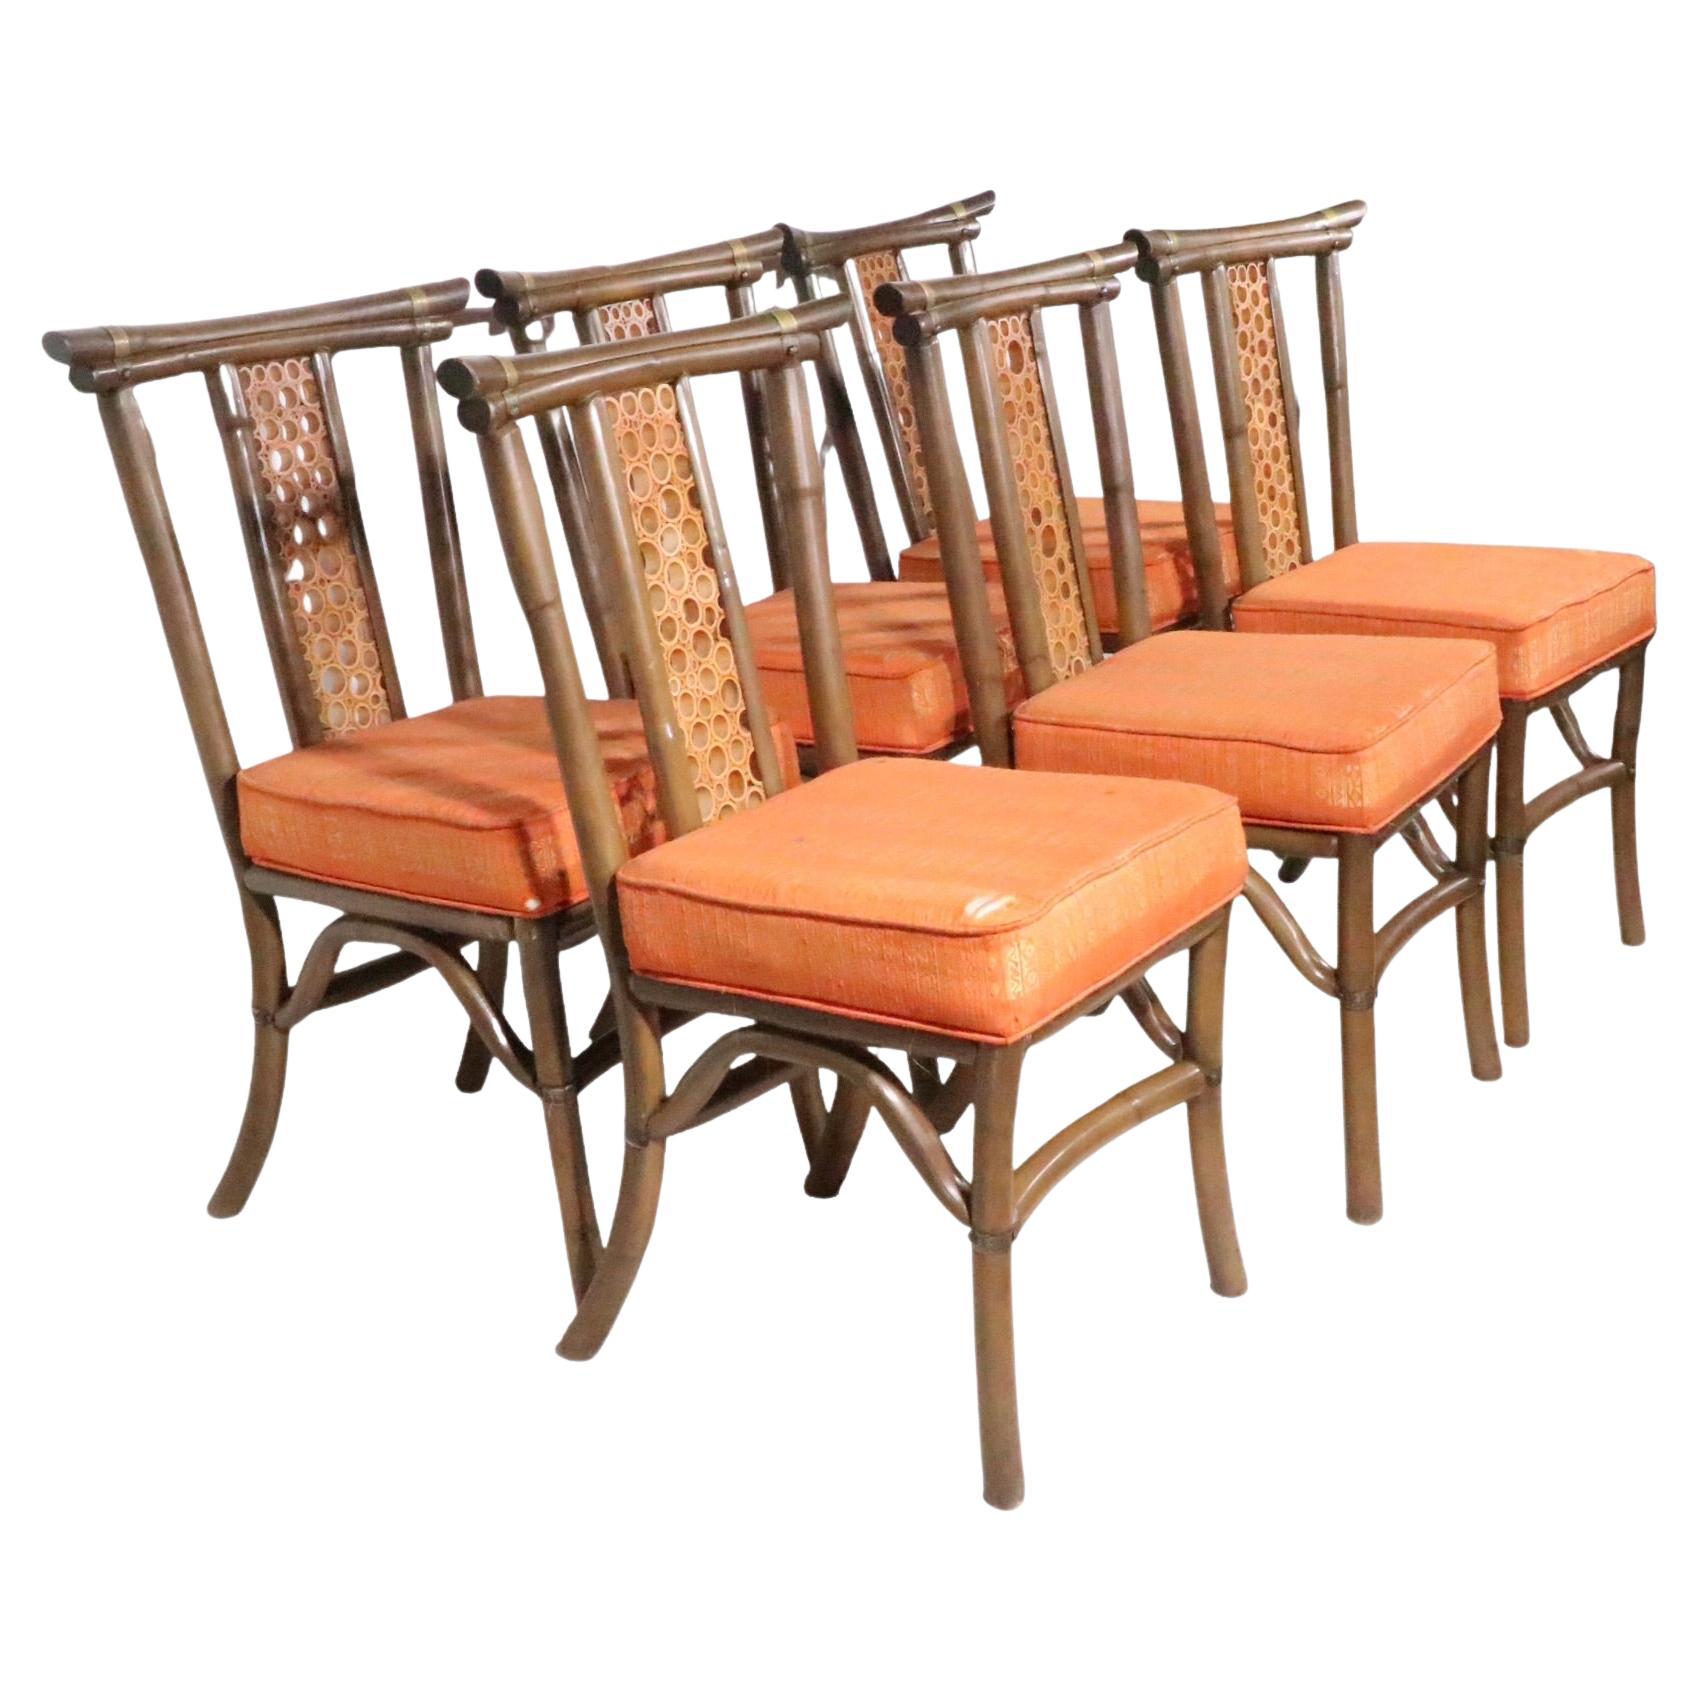 Set of Six Mid Century Bamboo Dining Chairs by Herbert Ritts c 1950/1960’s For Sale